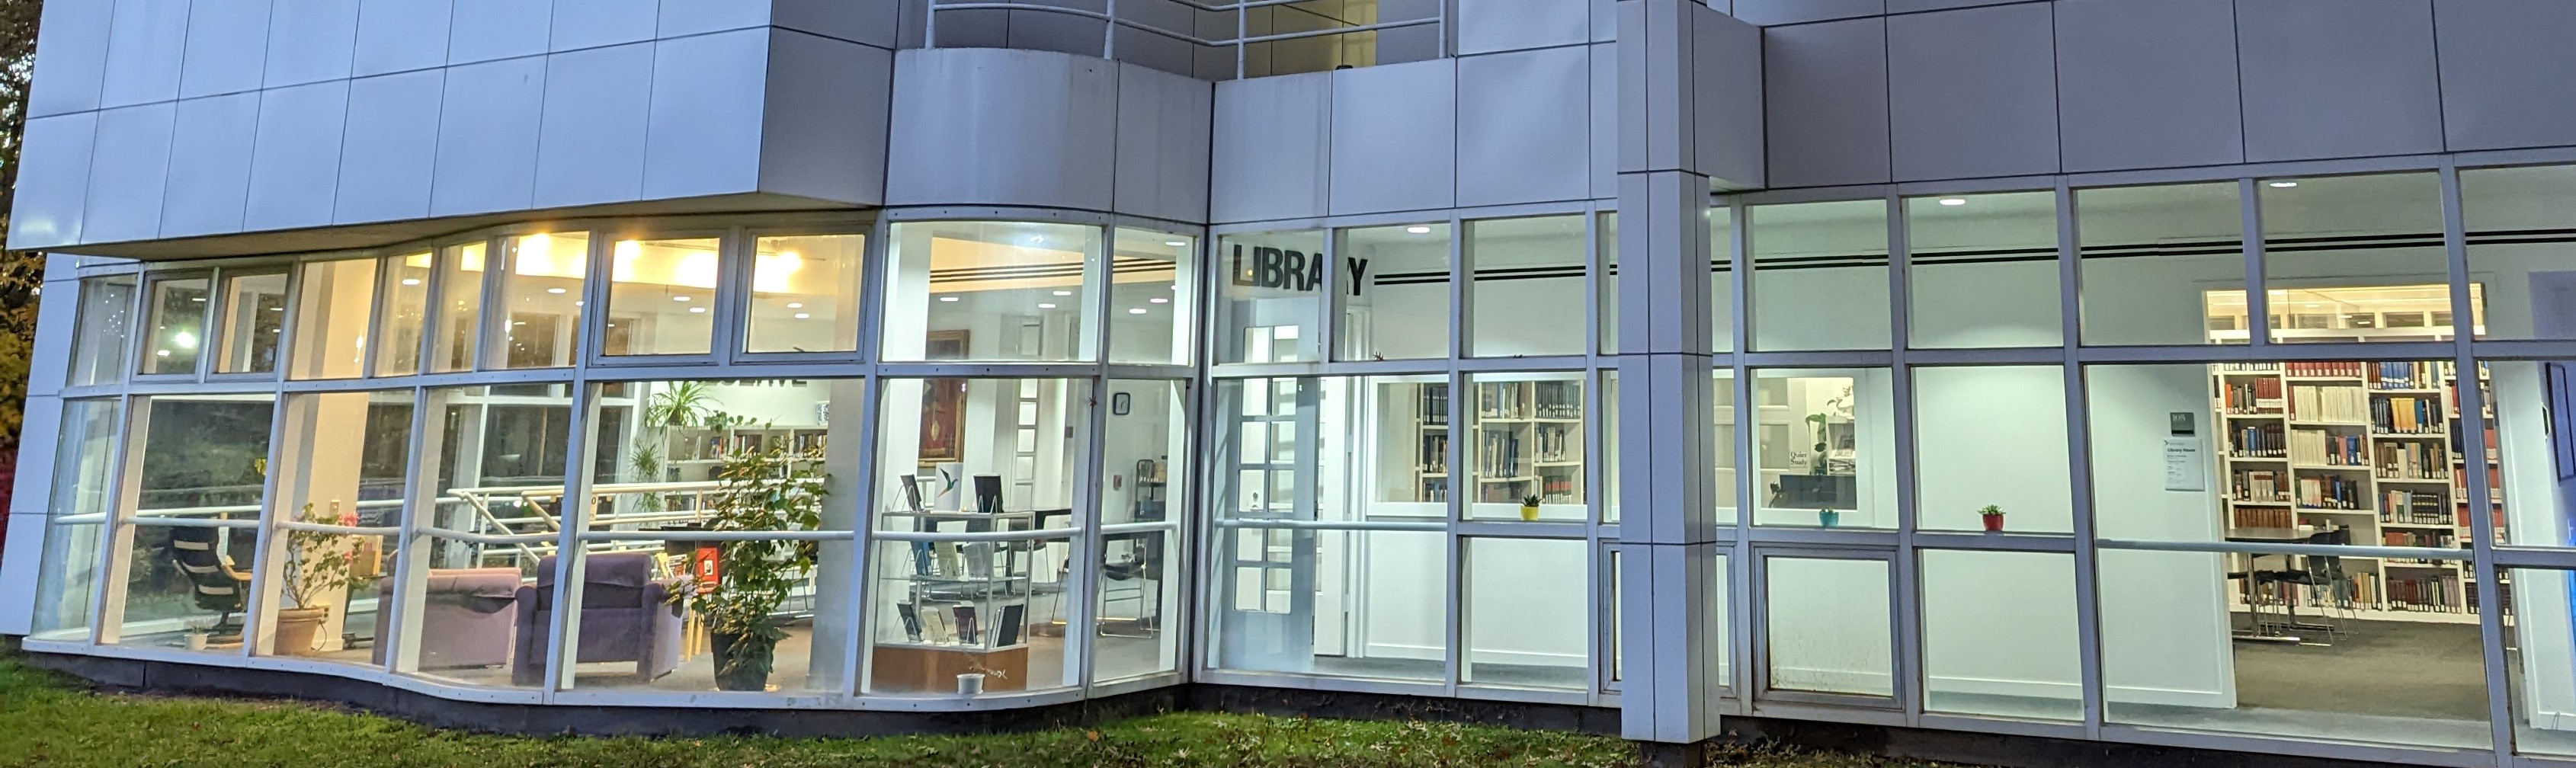 =Library